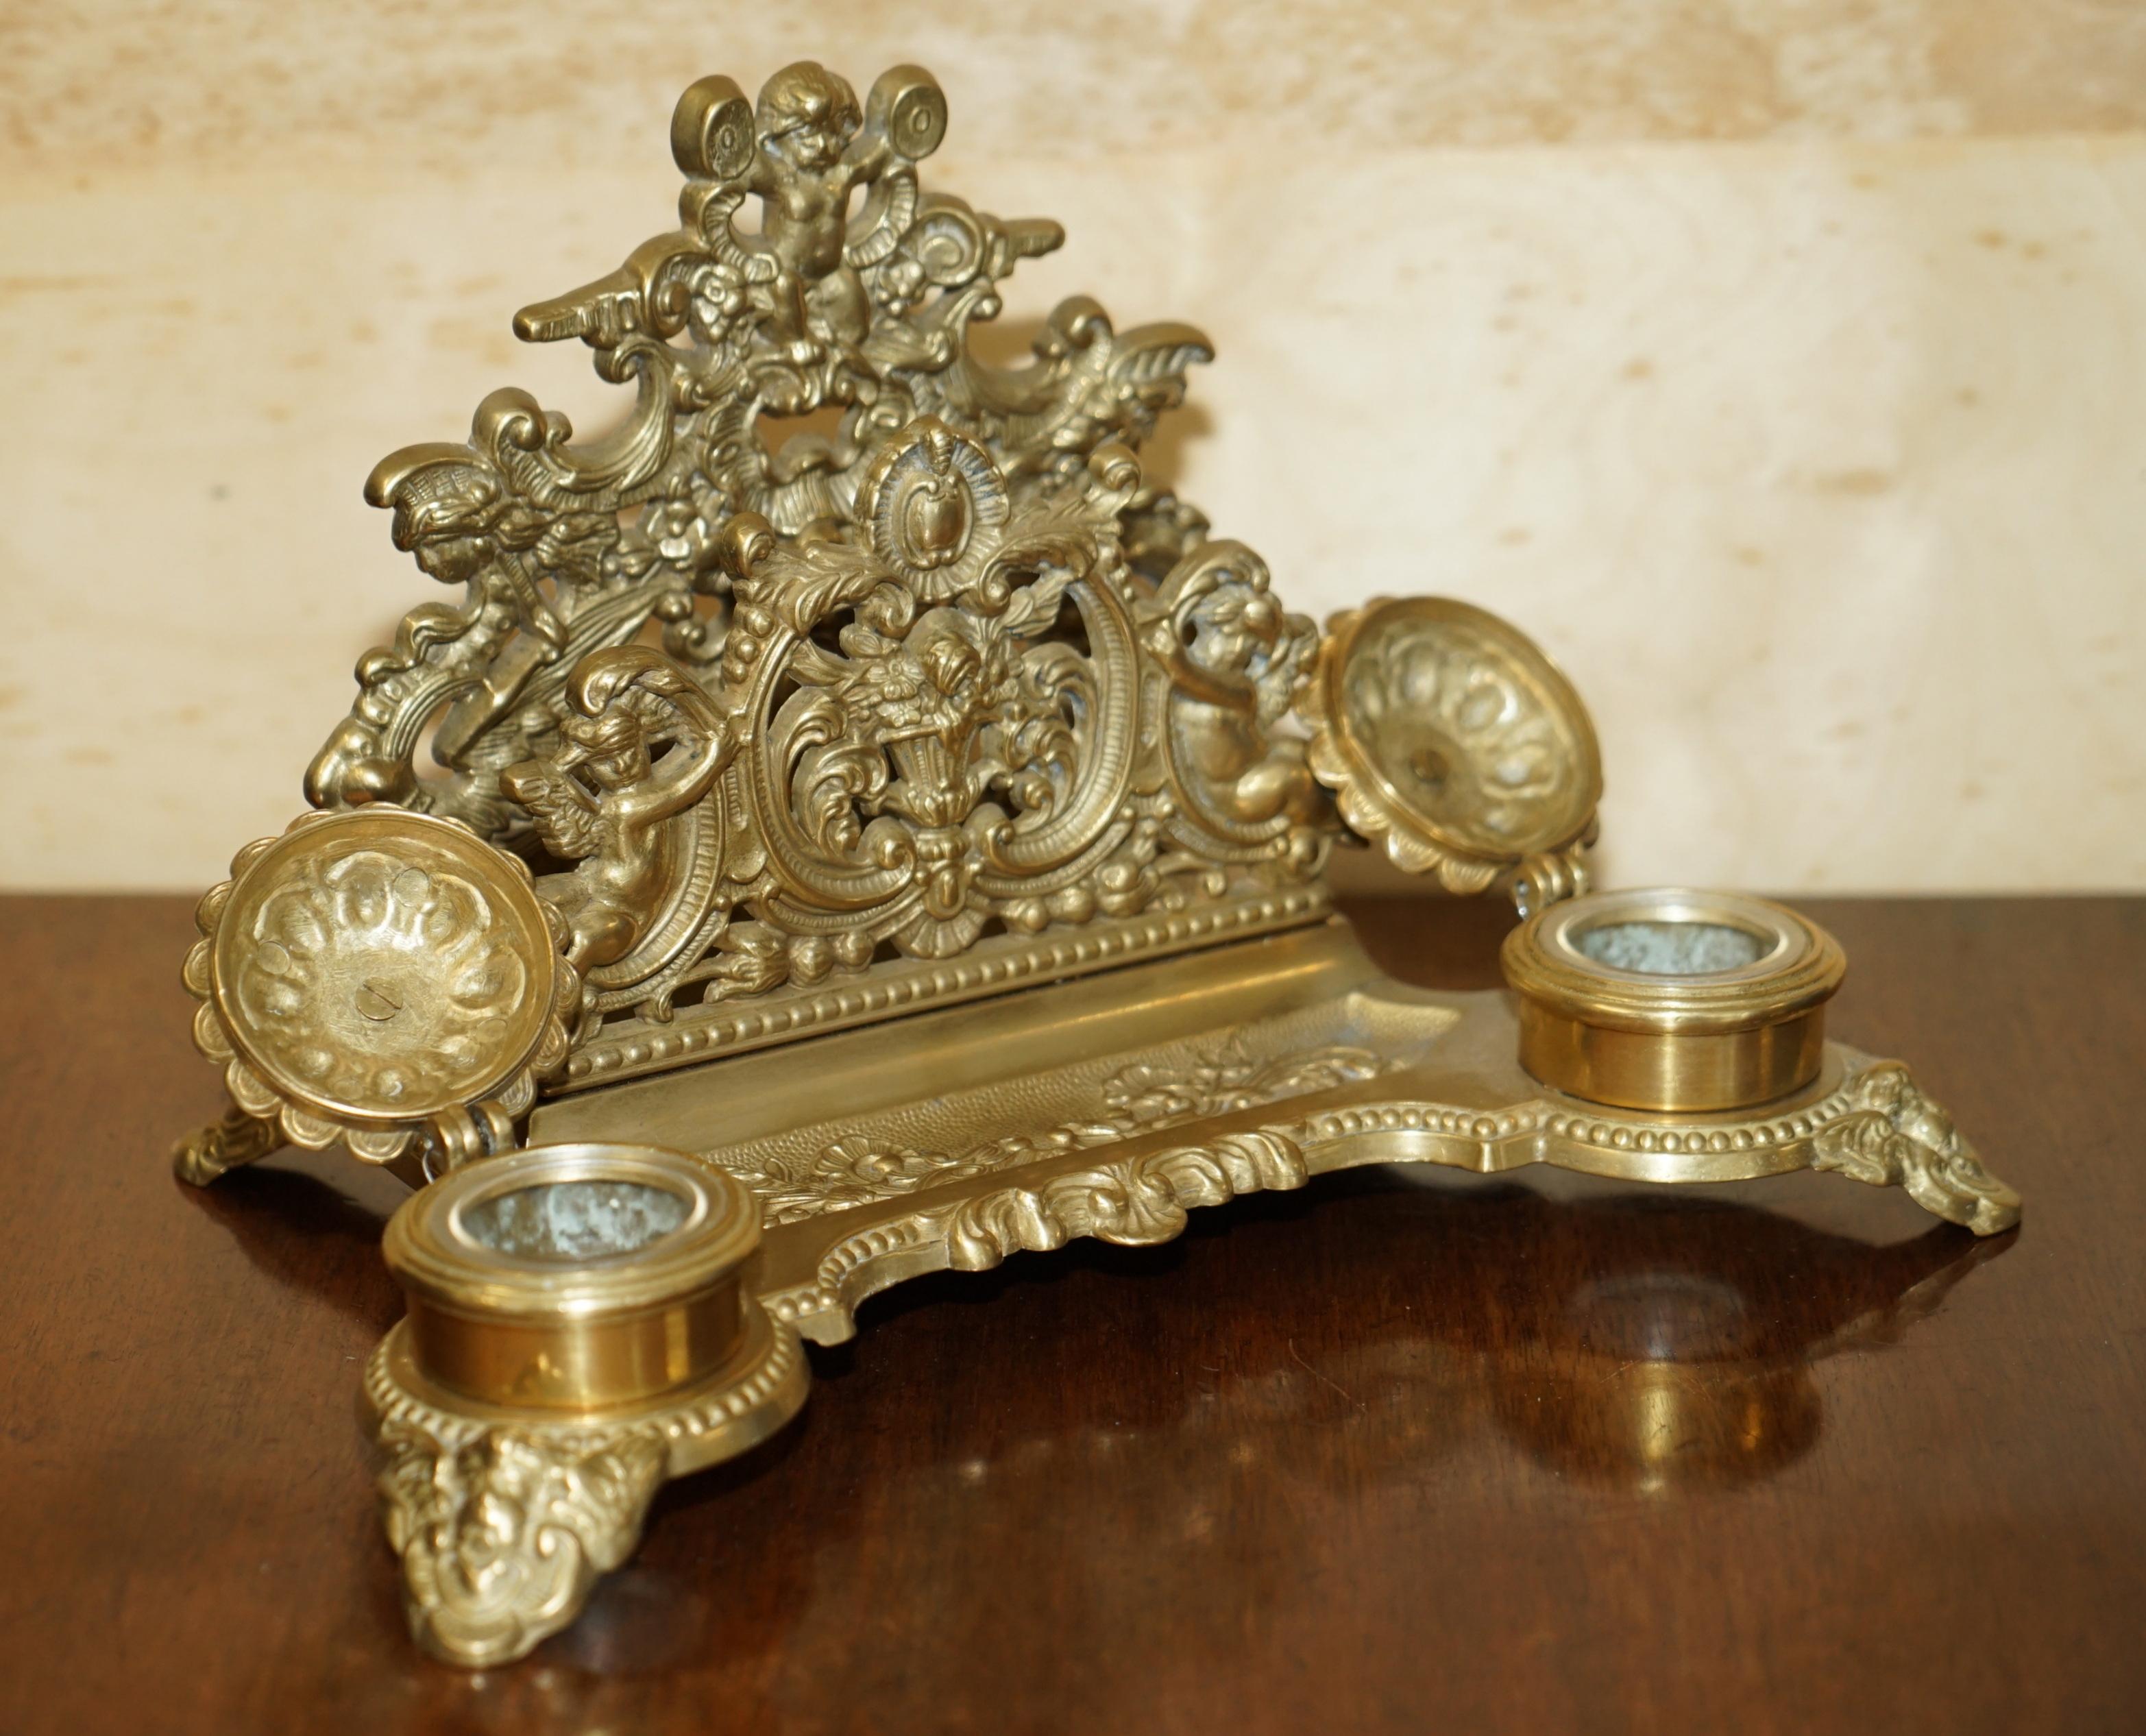 LOVELY ANTIQUE FRENCH BAROQUE REPOUSSE GiLT BRASS CHERUB INKWELL LETTER STAND im Angebot 13